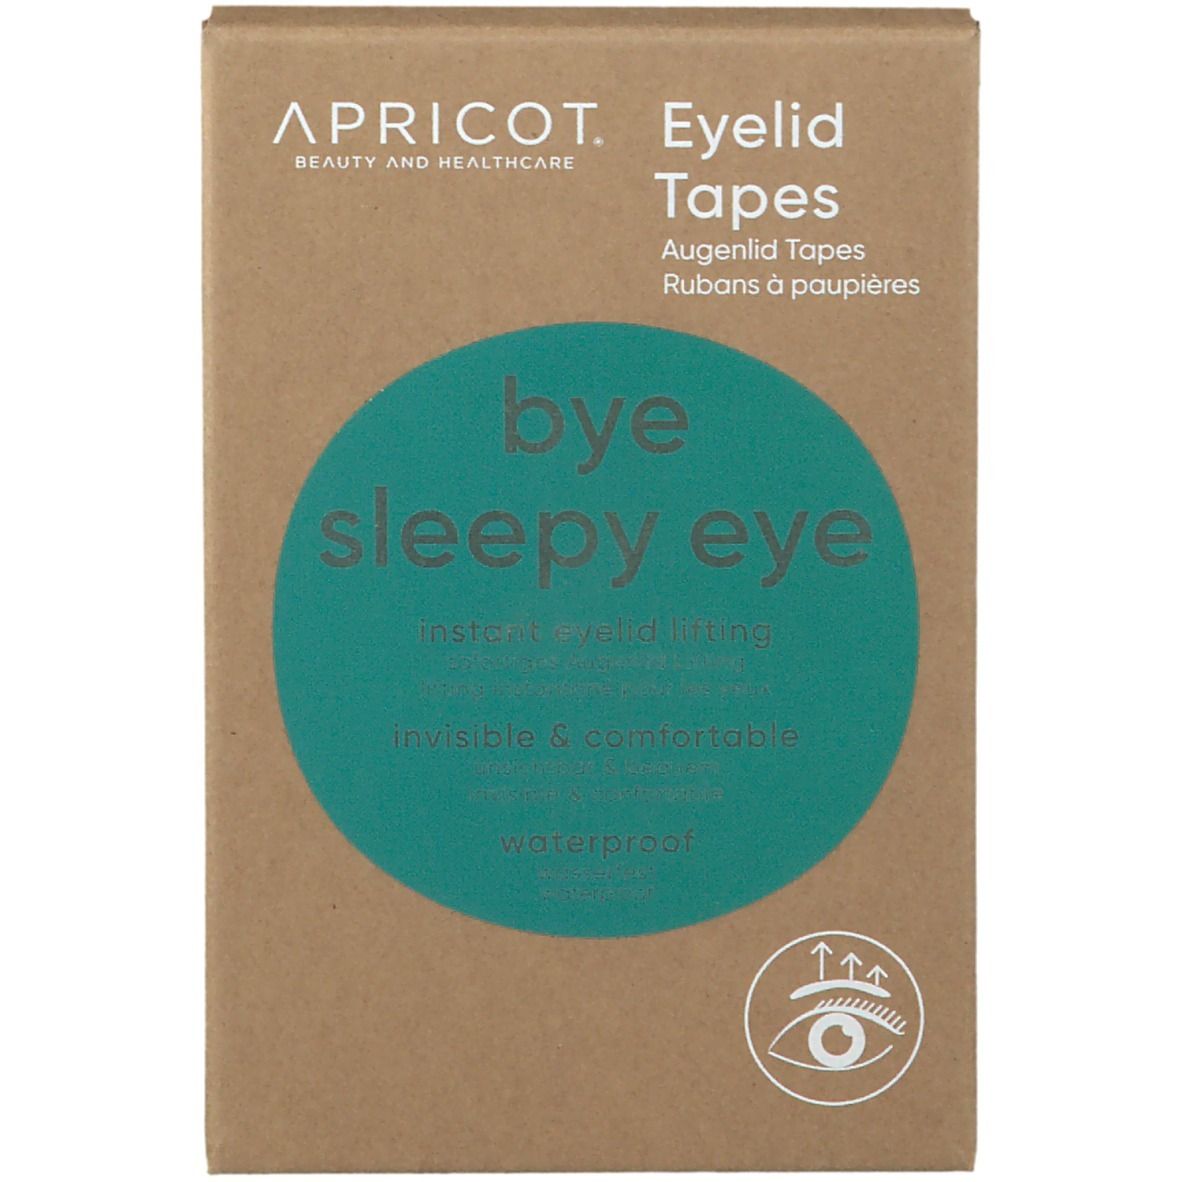 Image of APRICOT bye sleepy eye Augenlid Tapes